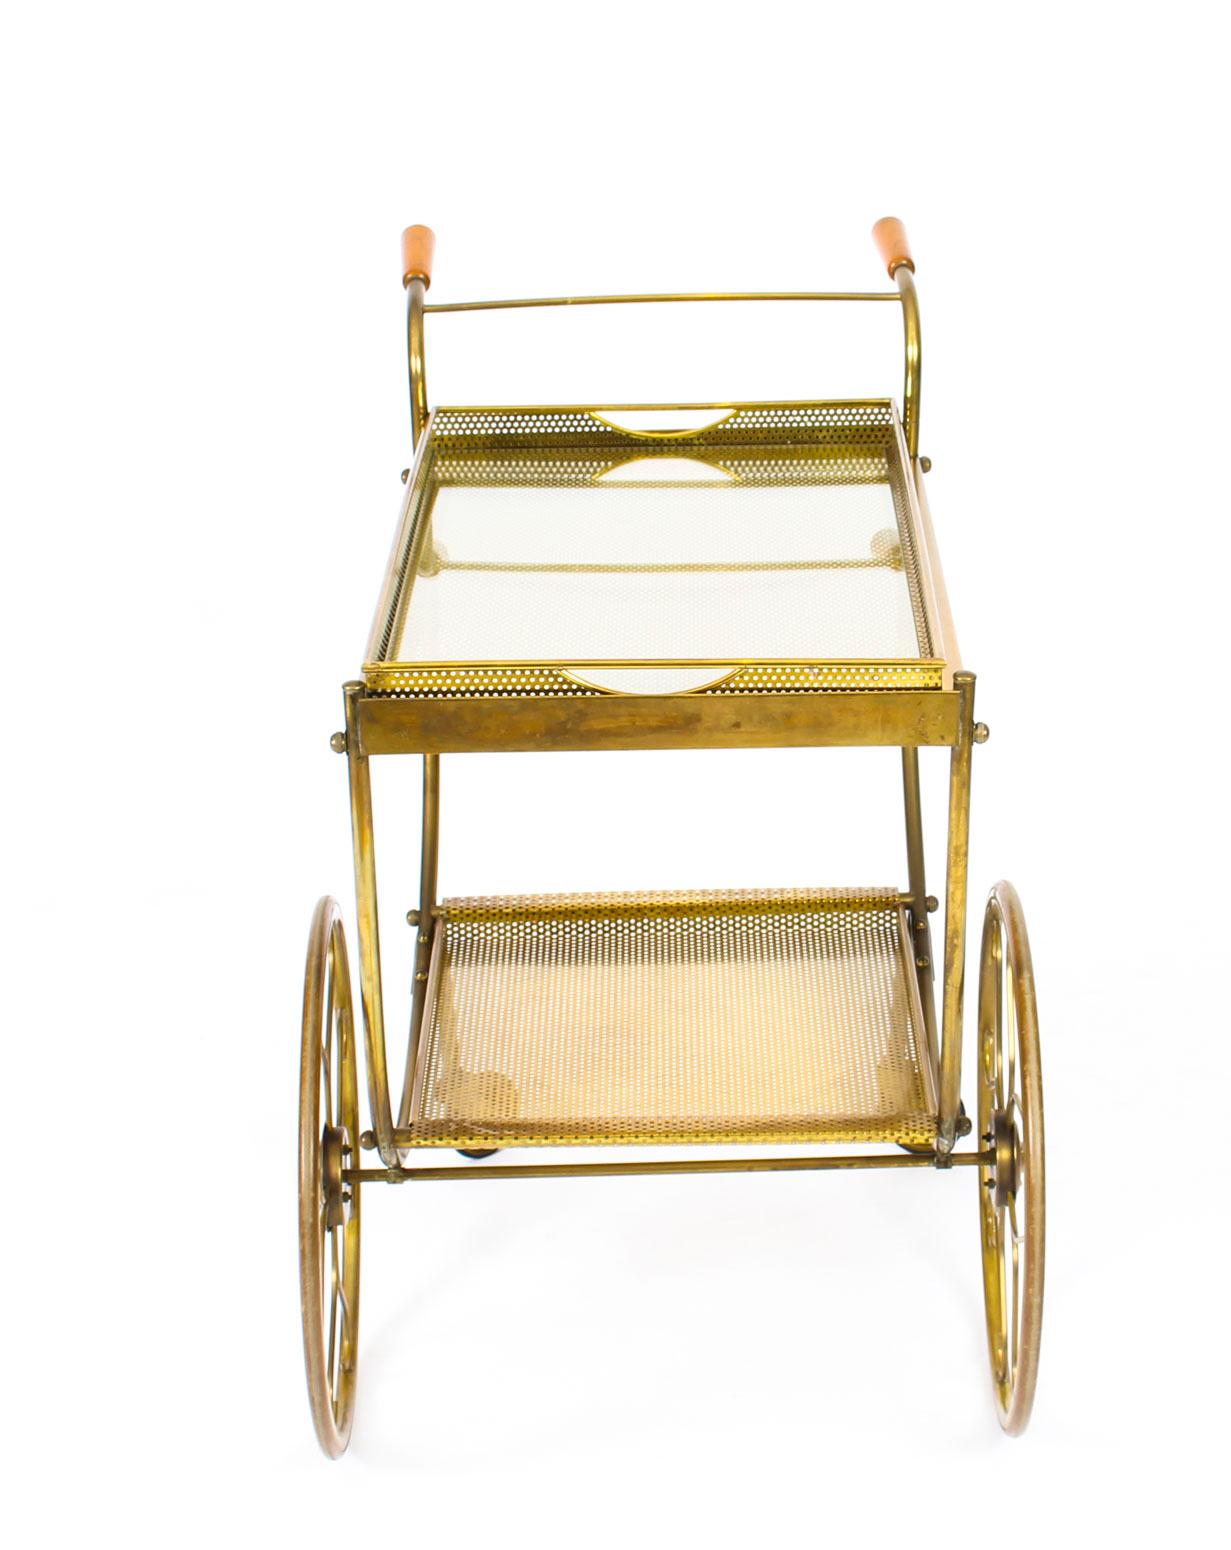 This is a striking antique French modernist gilt two-tier drinks trolley, circa 1970 in date.

The trolley is of rectangular form and features a two handled glass serving tray which lifts out, on top with a smaller tray below for bottles,